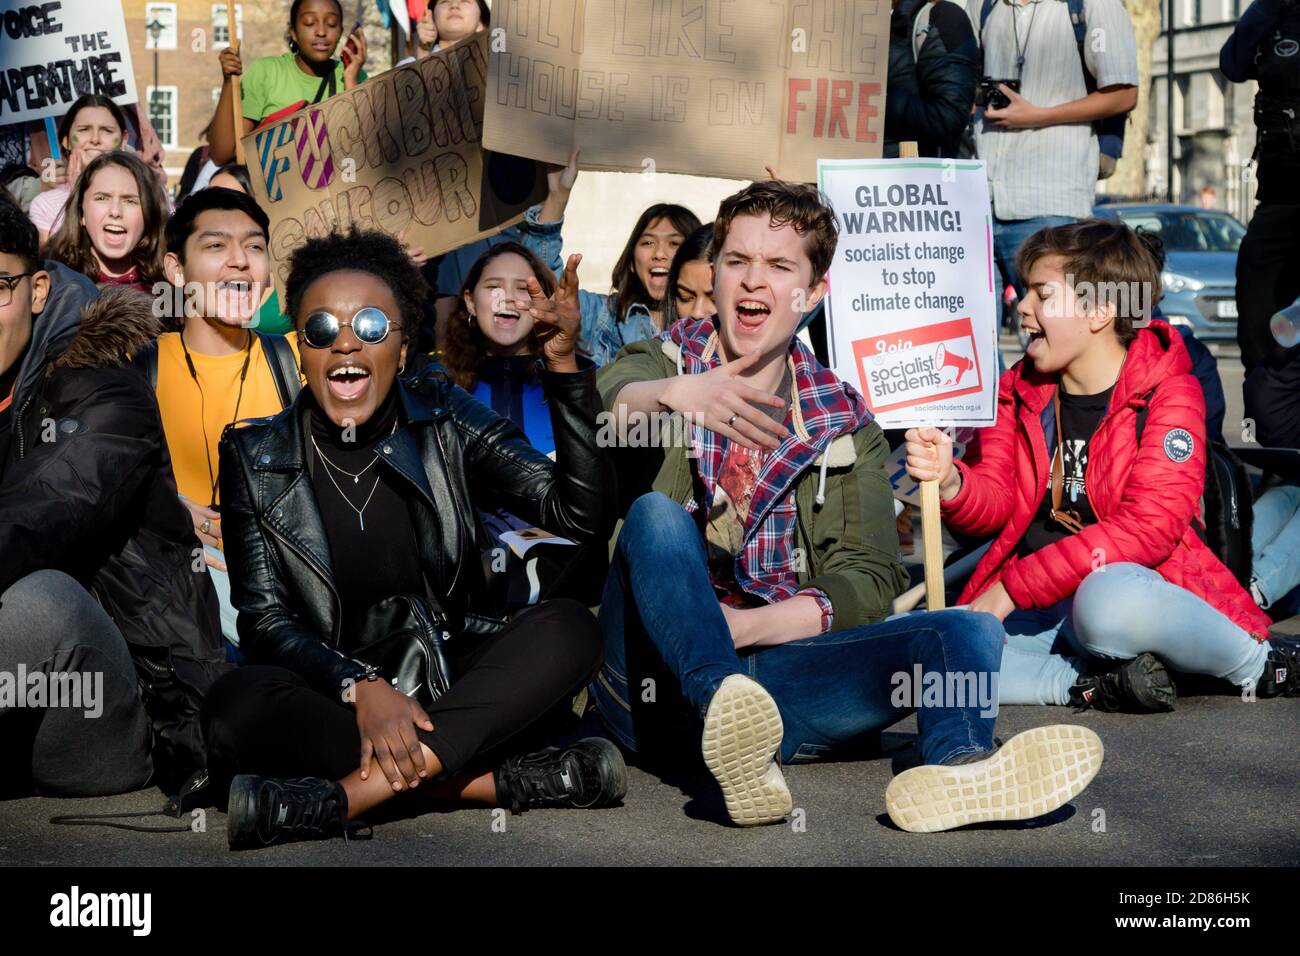 London, UK, United Kingdom 15th February 2019:- Striking school aged children in central London over climate change stage a sit down protest blocking Stock Photo